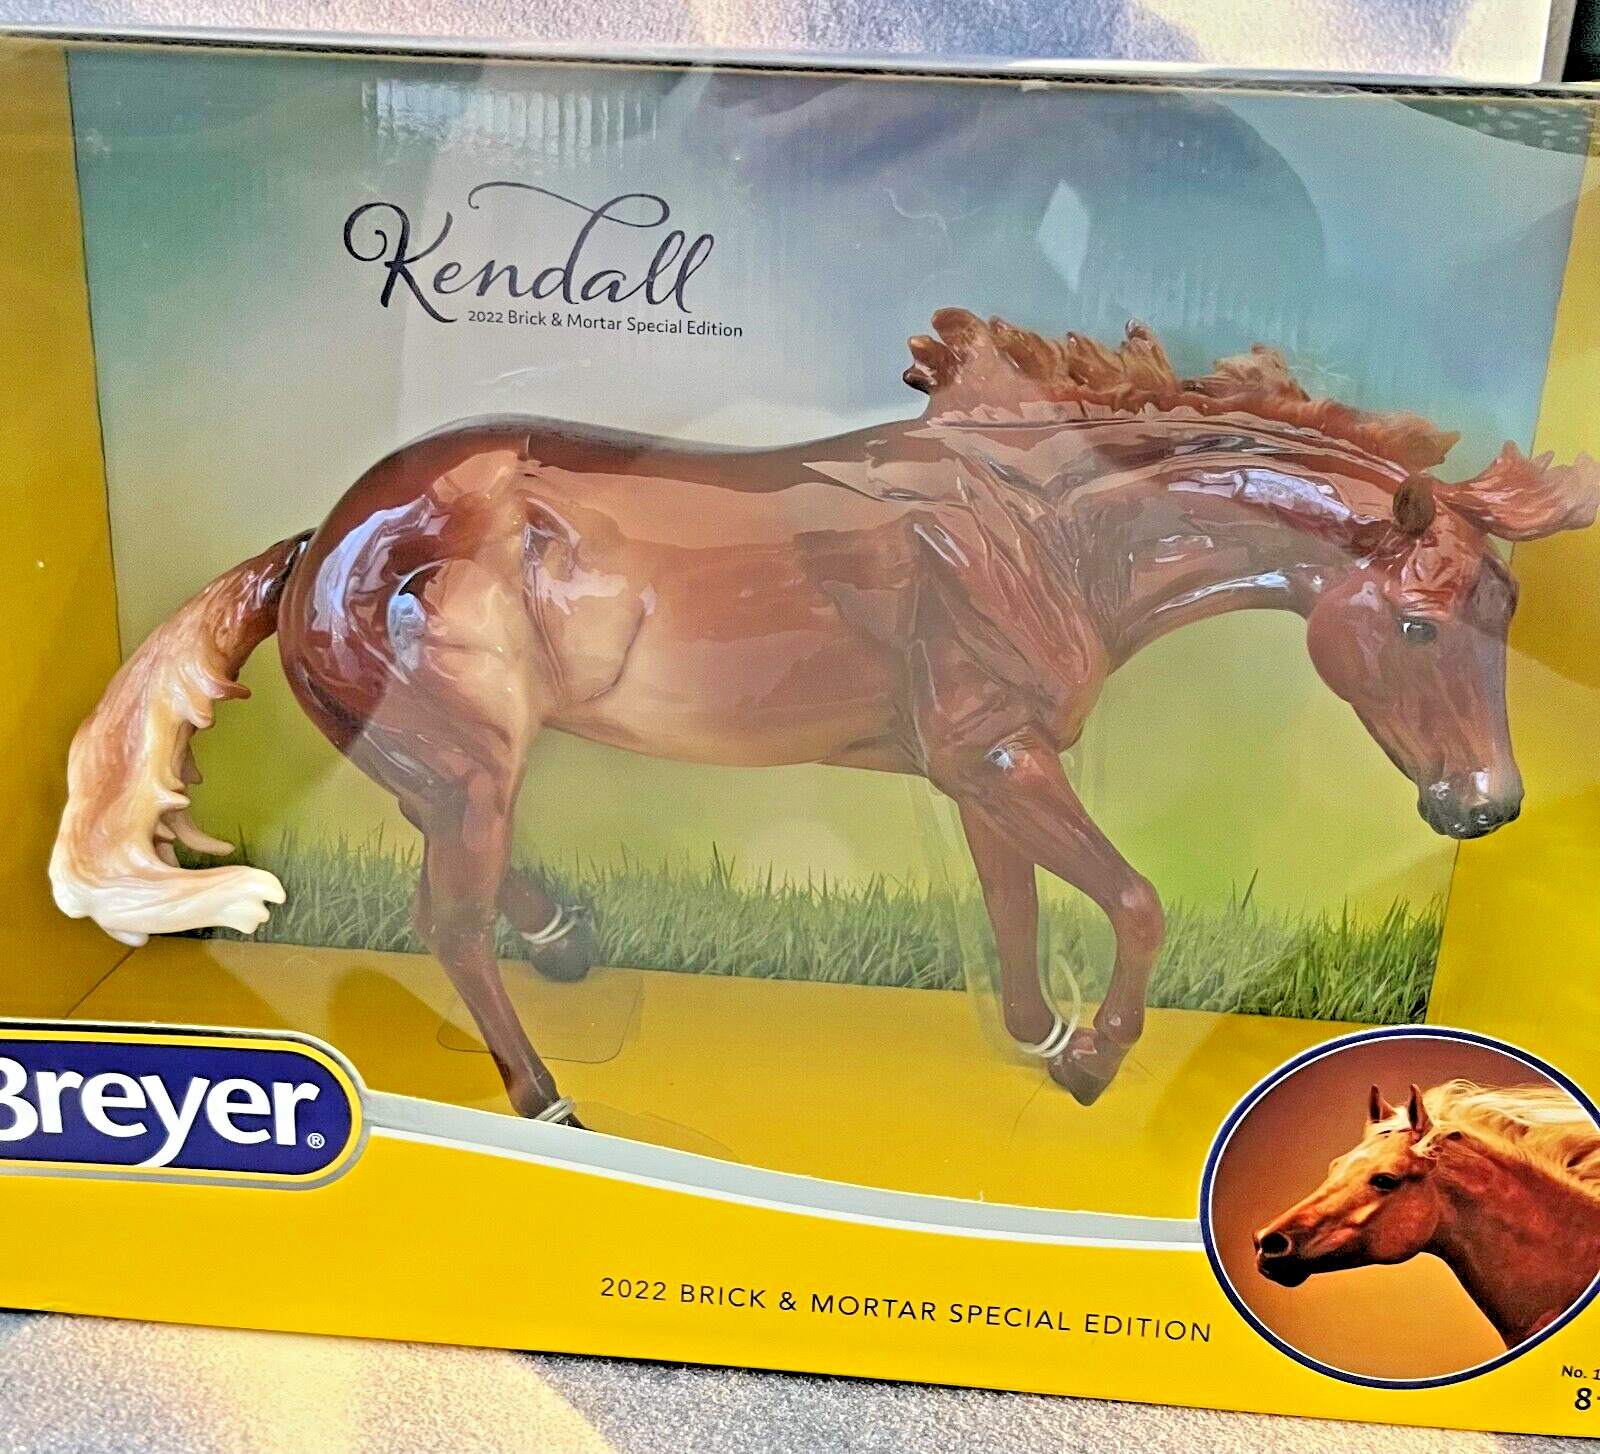 Breyer Tradit’l  KENDALL Glossy Chestnut Sorrel Working Cow Horse. New In Box